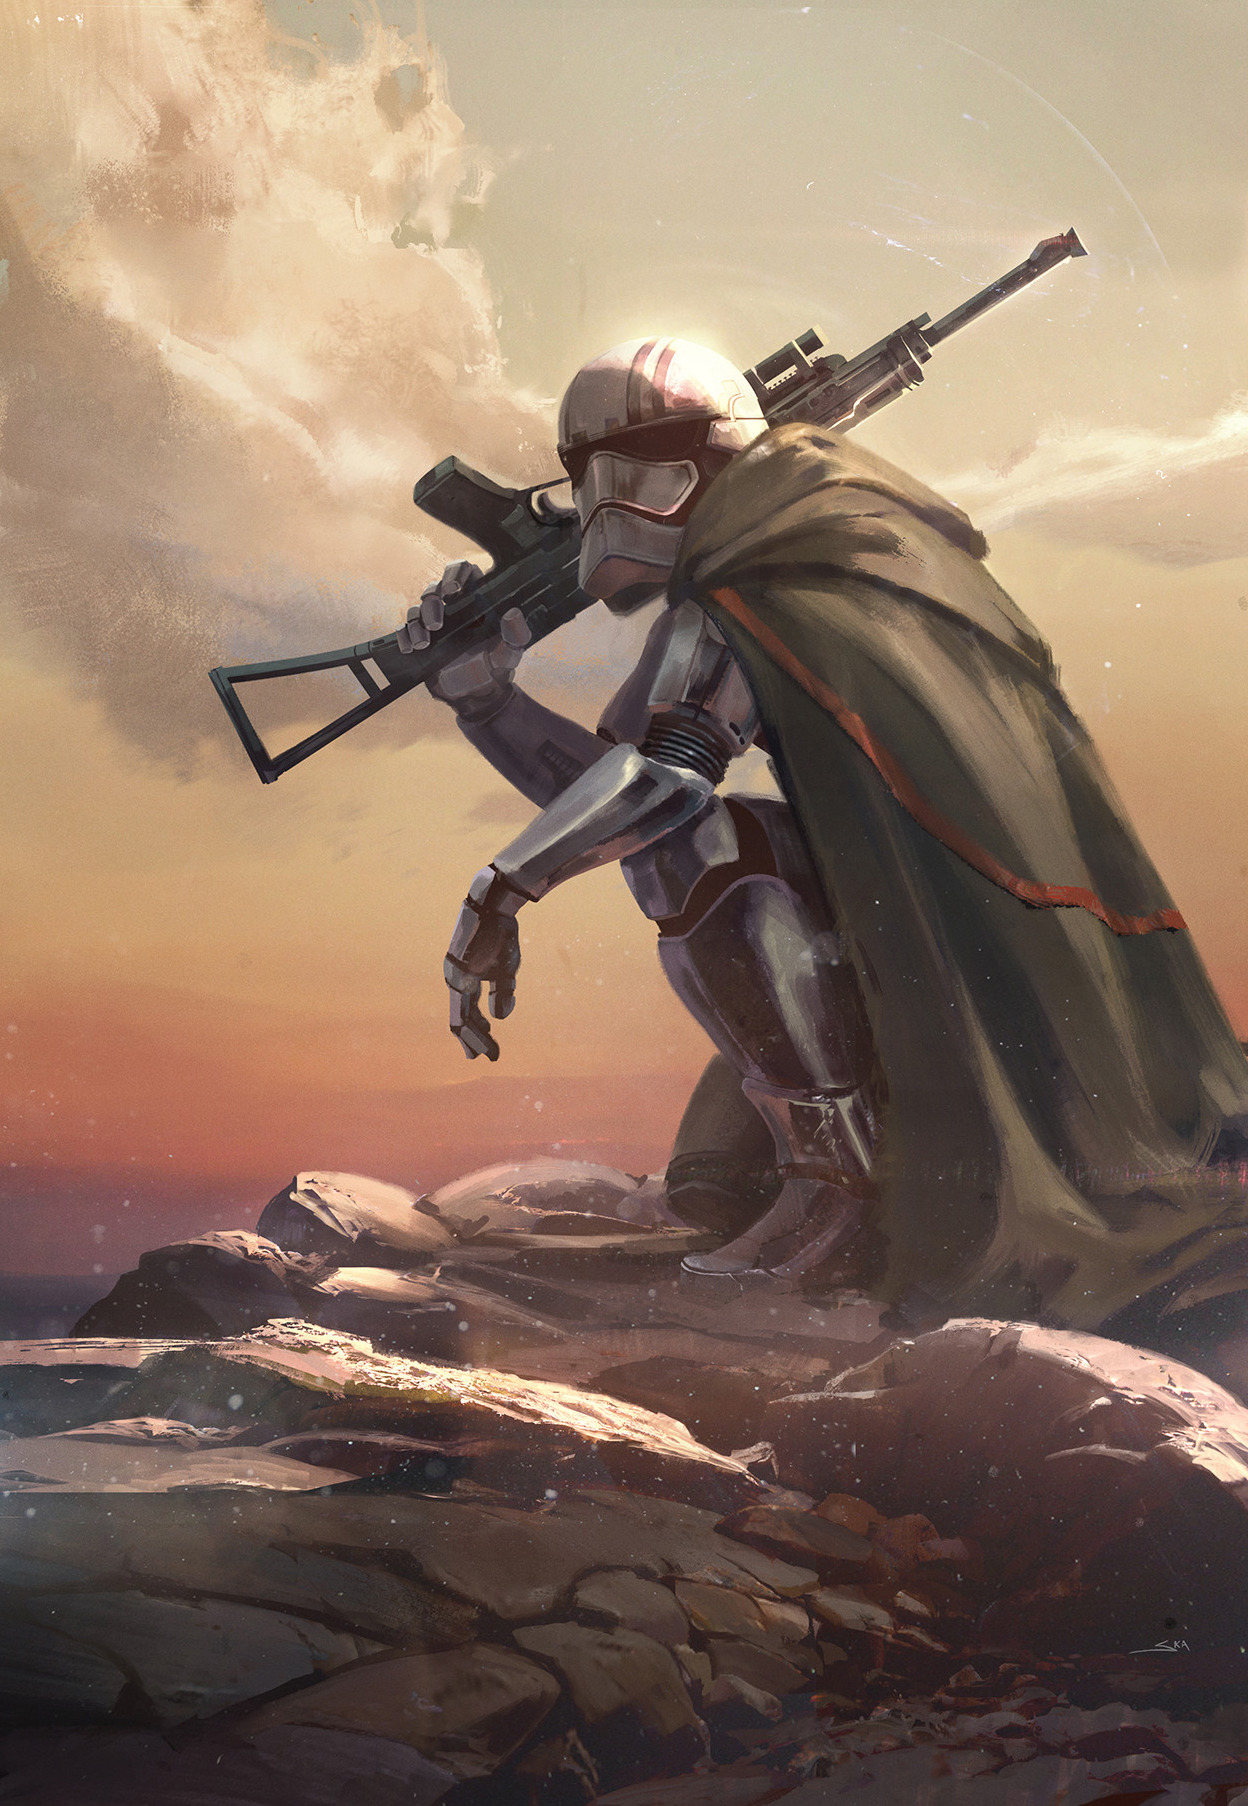 cinemagorgeous:  Tribute to Captain Phasma from Star Wars: The Force Awakens by artist